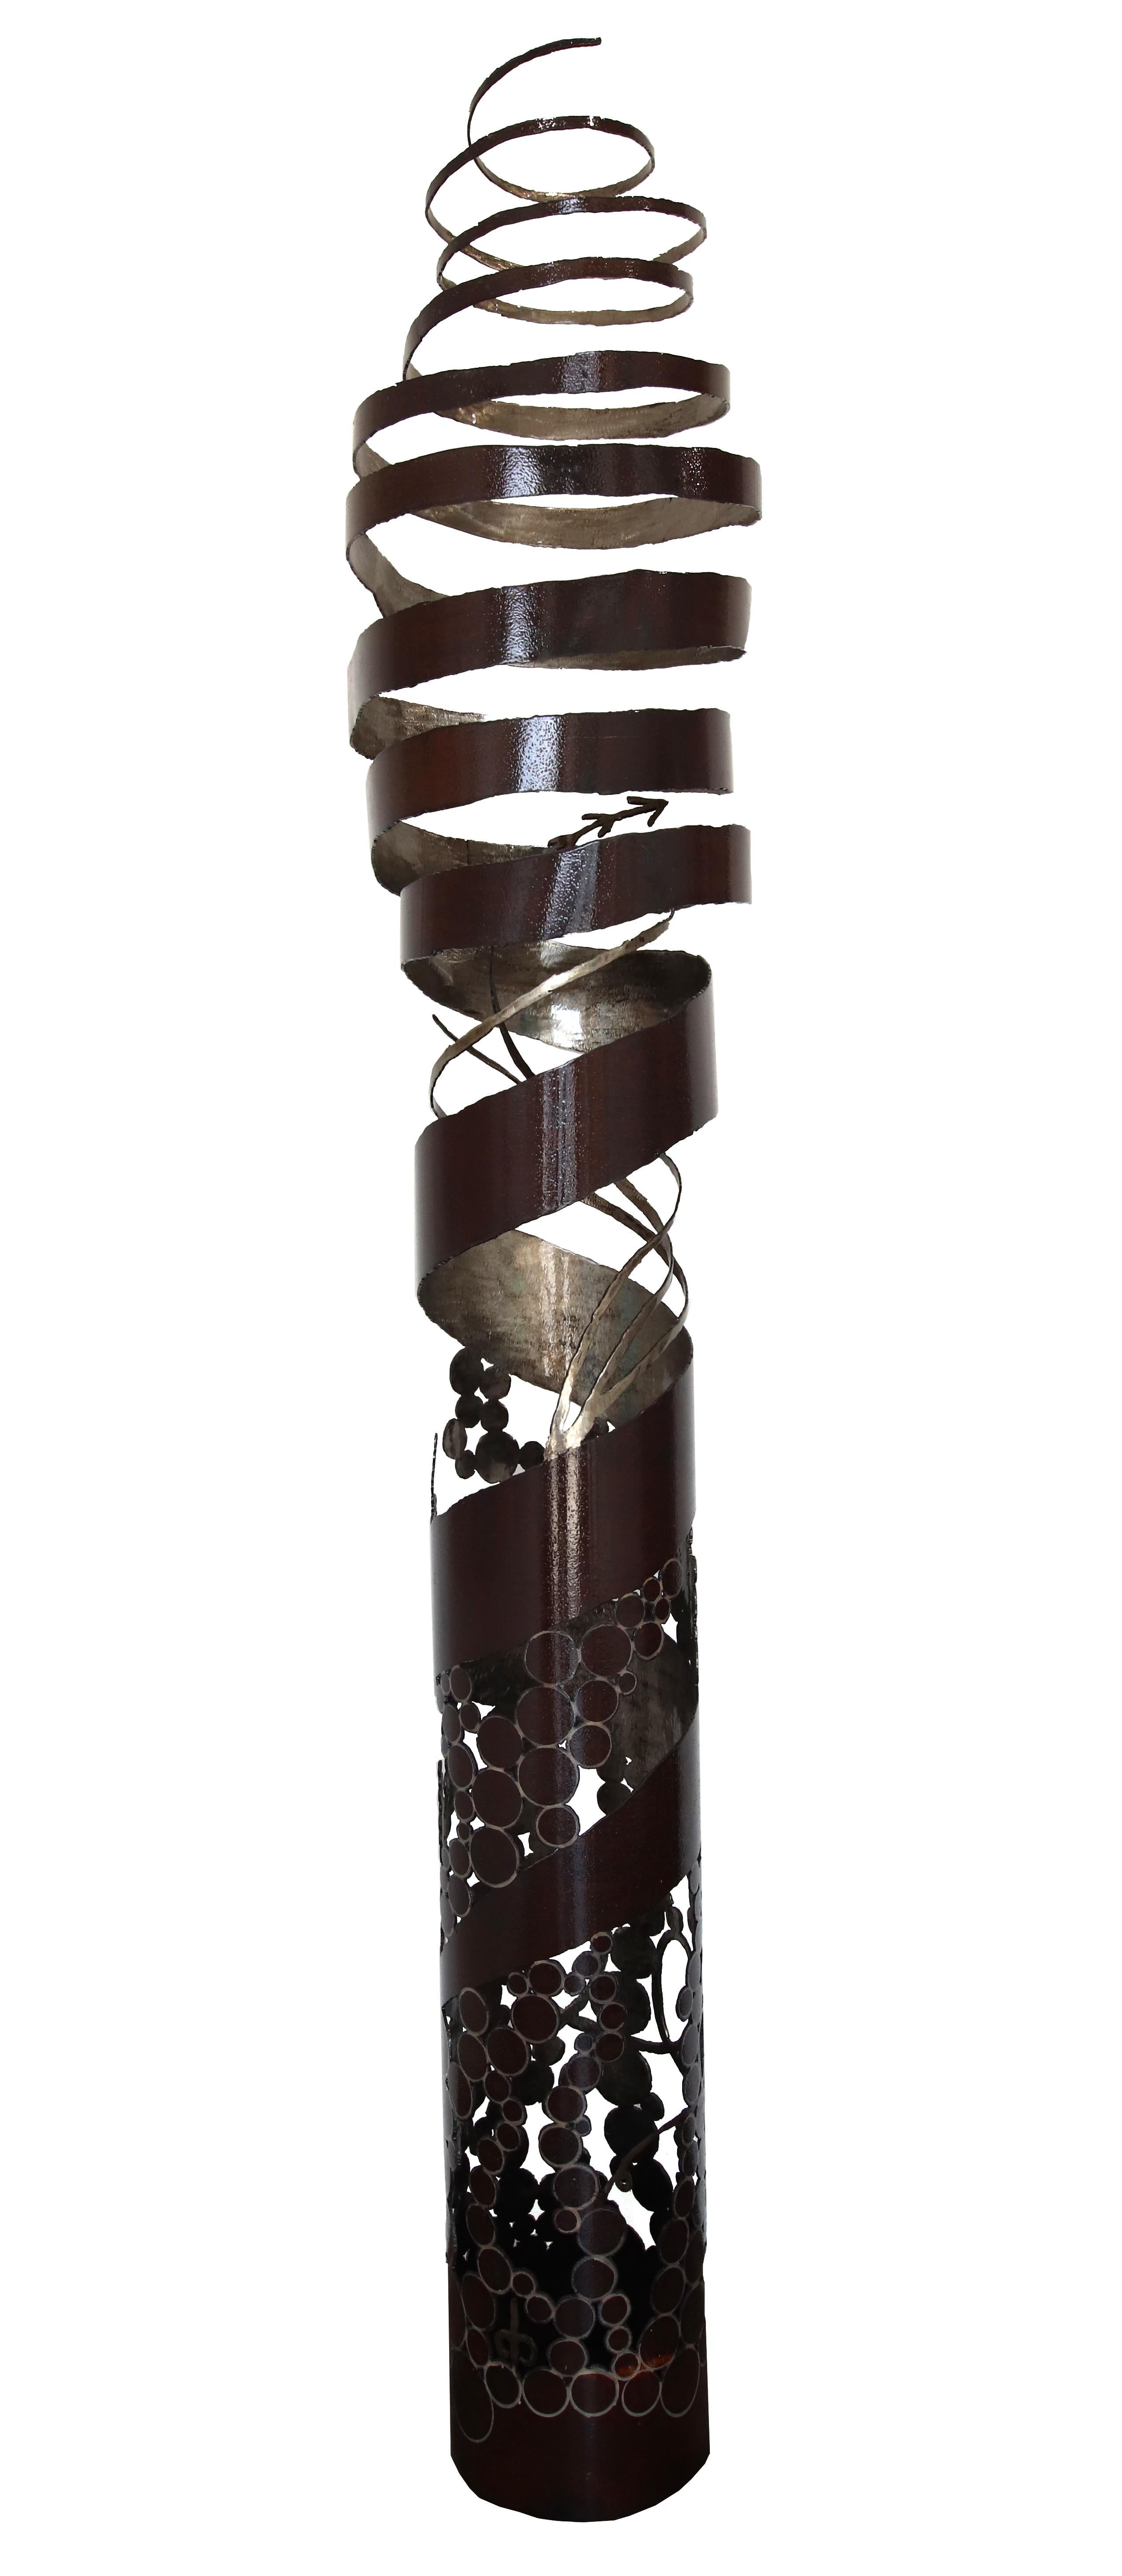 Spiral to the Third Power -  Large Steel Sculpture for Outdoors and Indoors